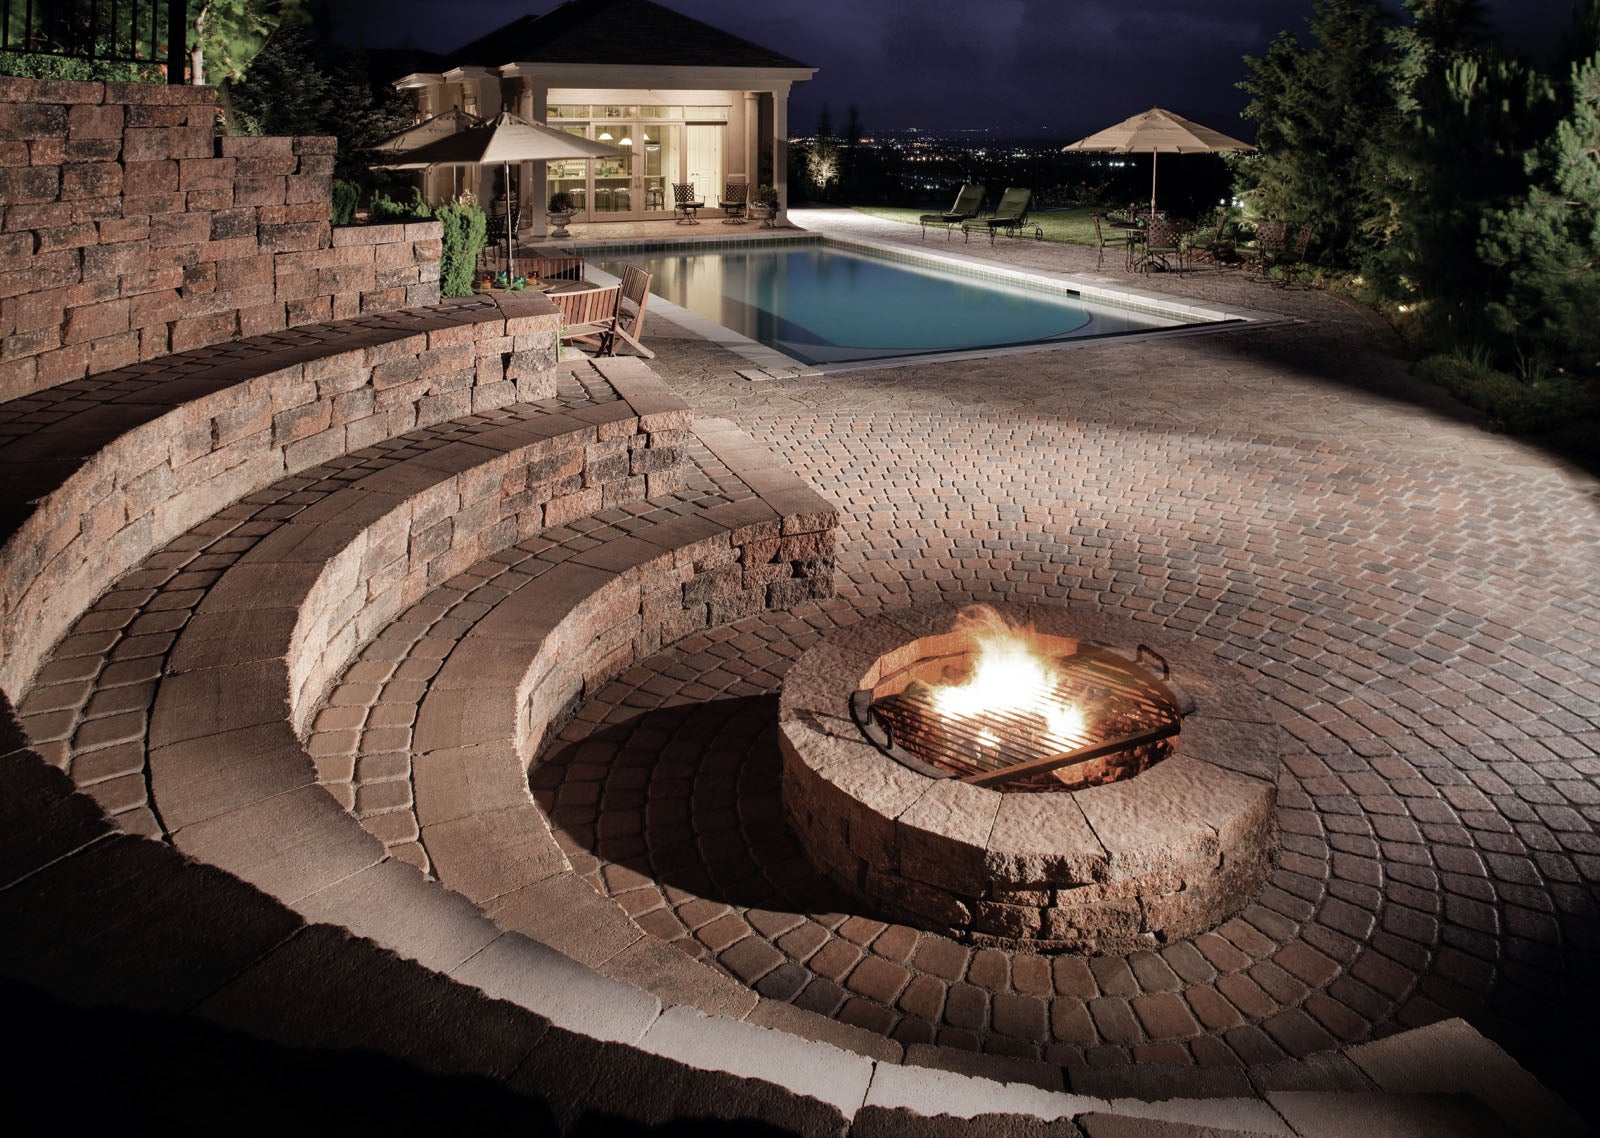 Fire Pits with Built-in Seat Walls